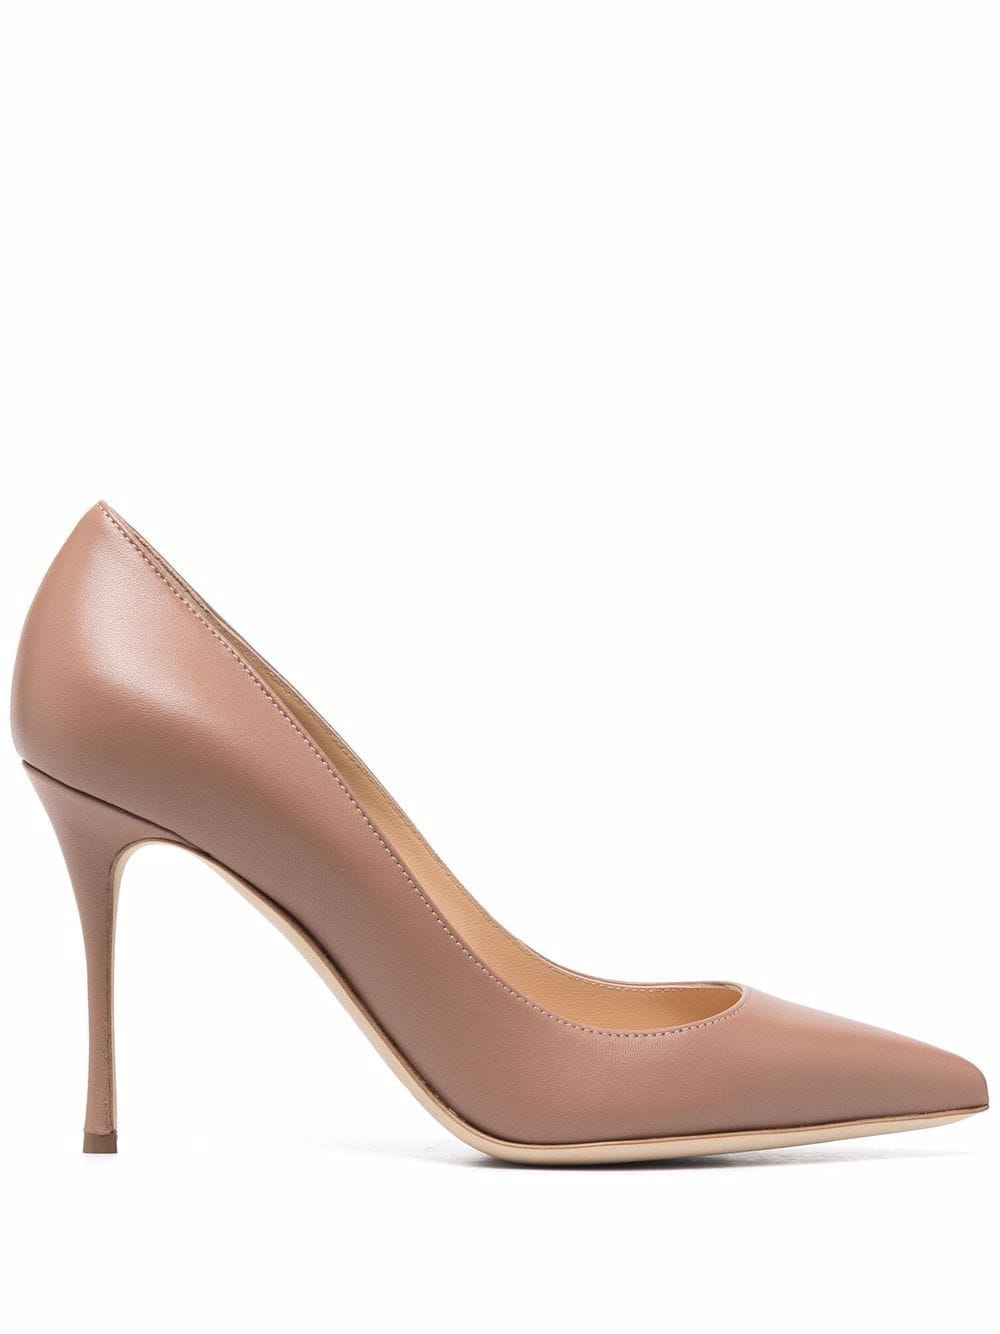 Image 1 of Sergio Rossi pointed toe pumps